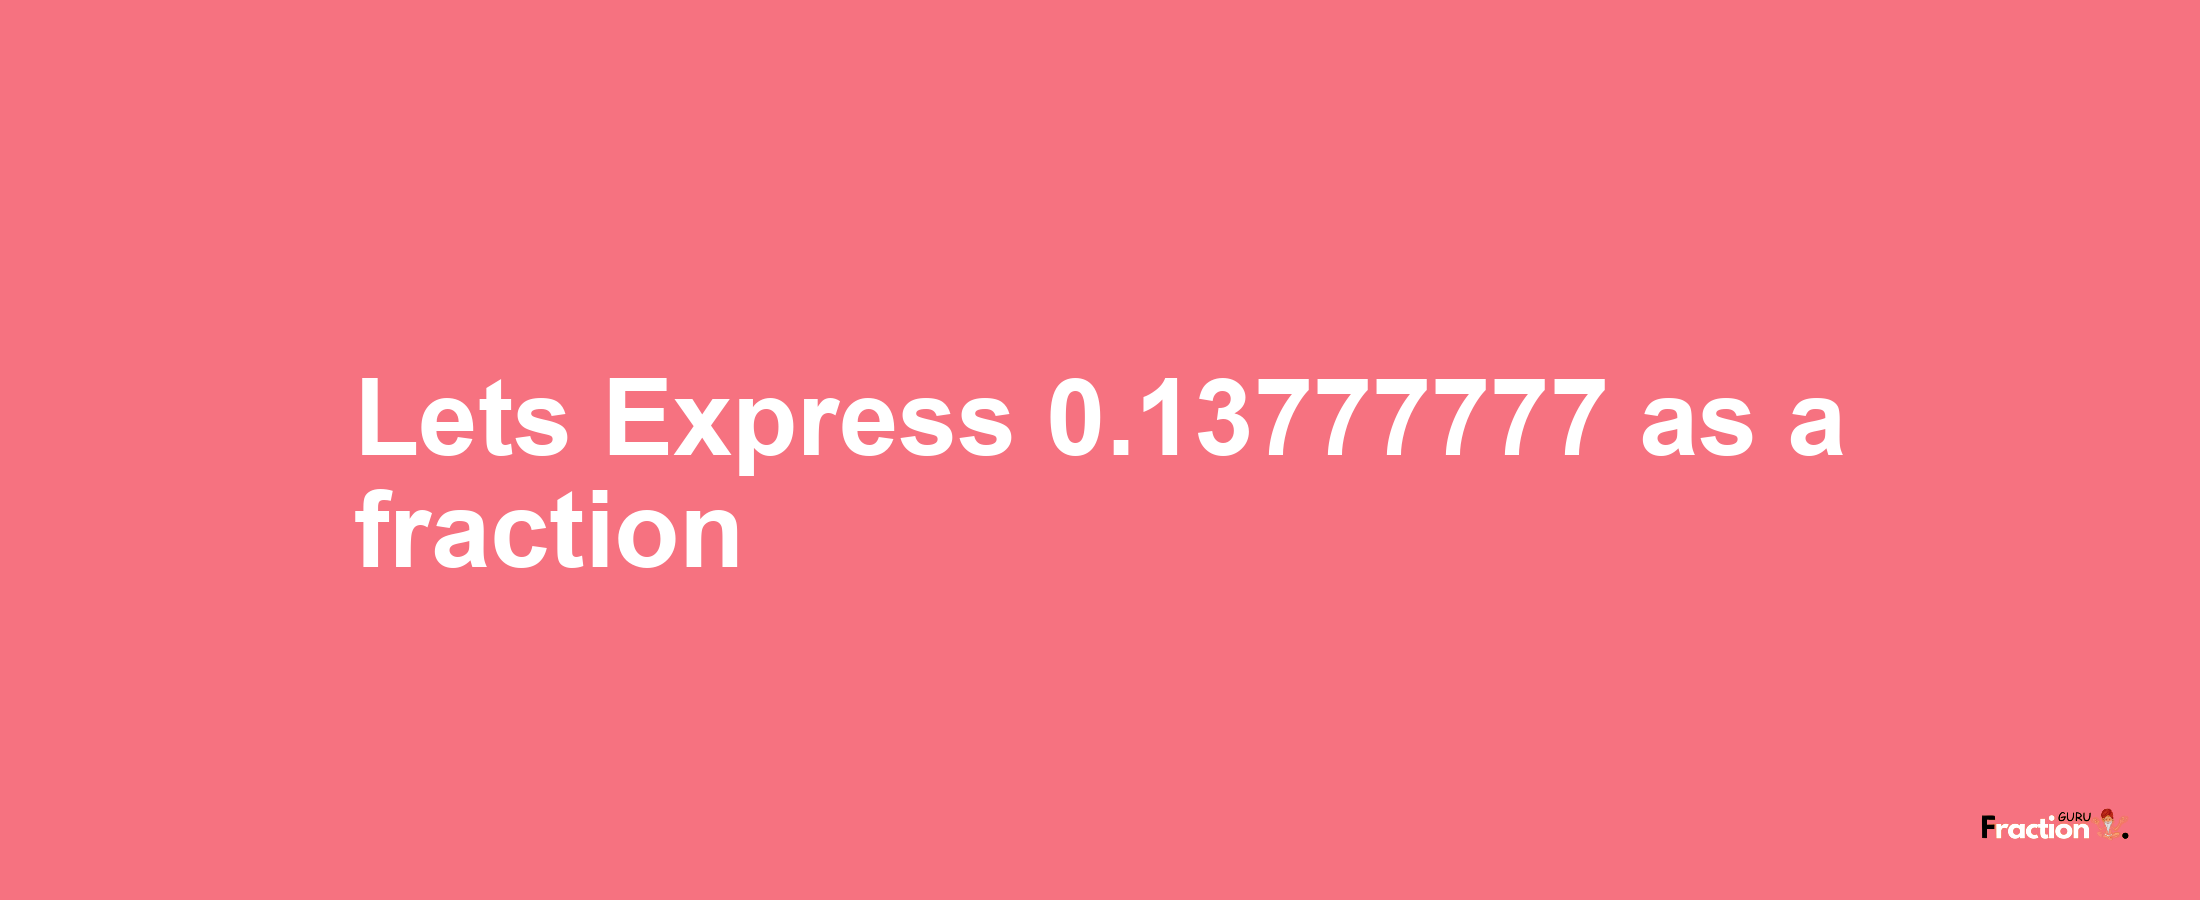 Lets Express 0.13777777 as afraction